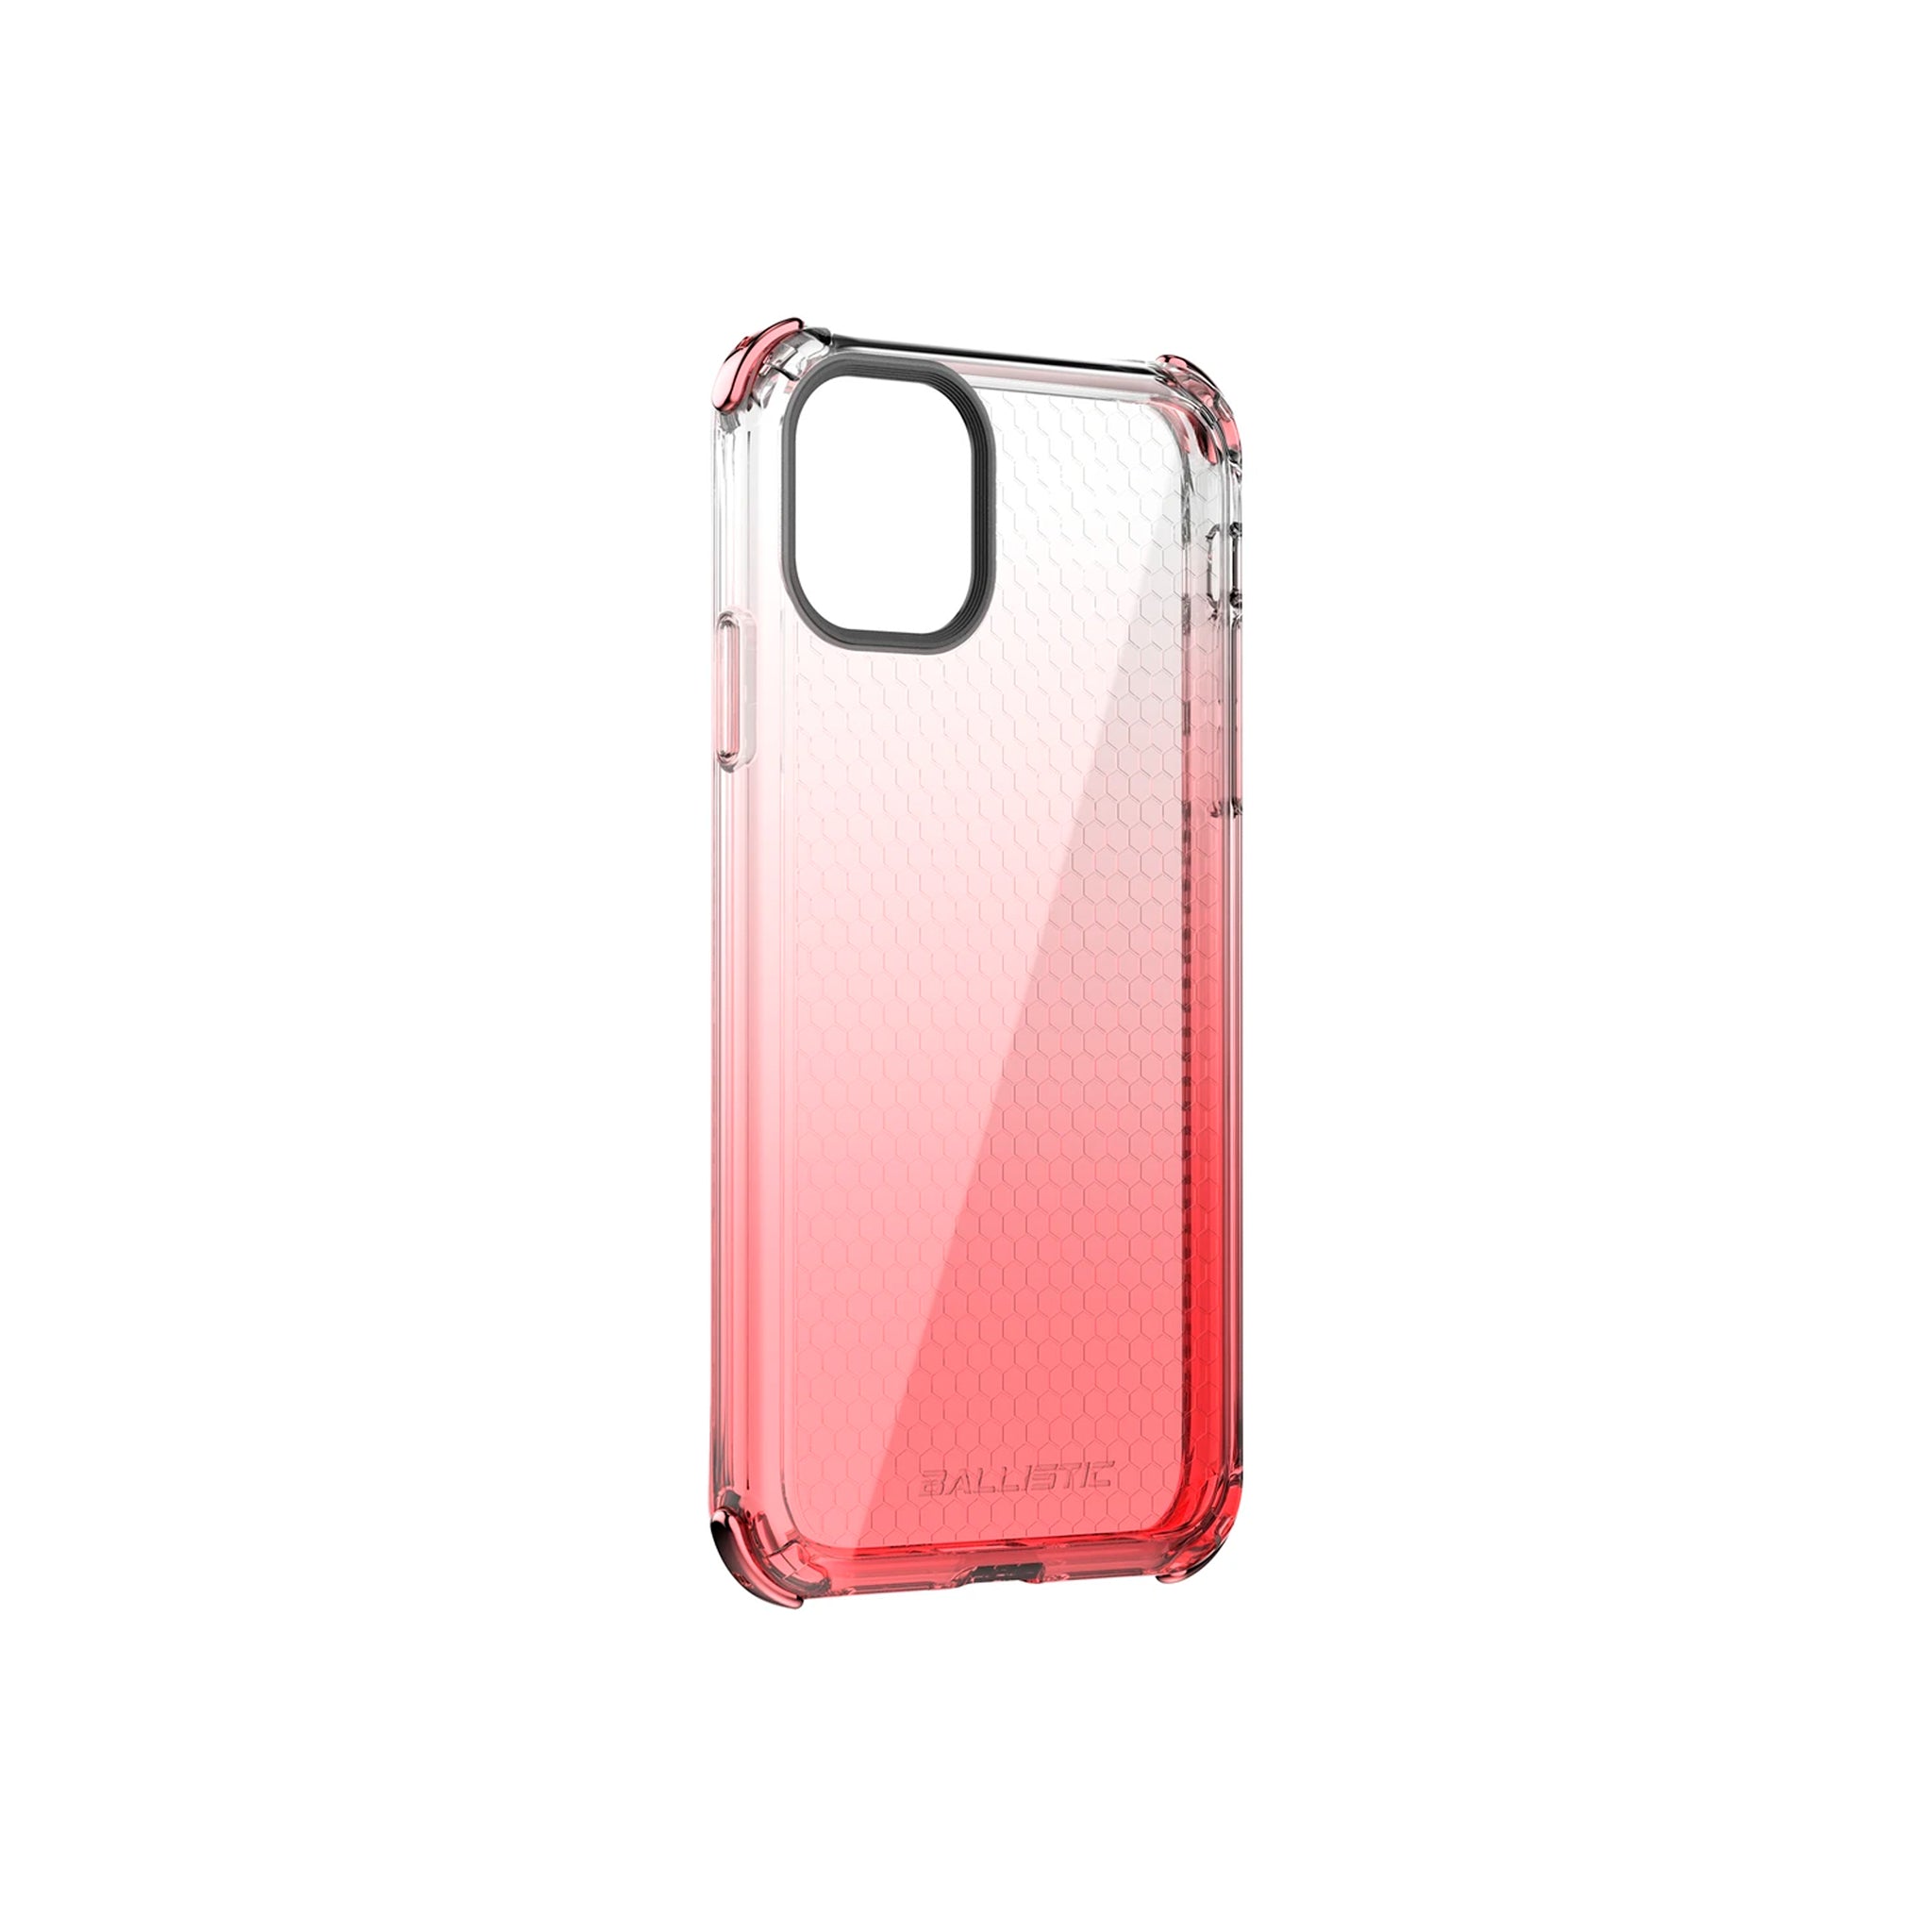 Ballistic - Jewel Spark Series For iPhone 11 Pro Max  - Rose Gold